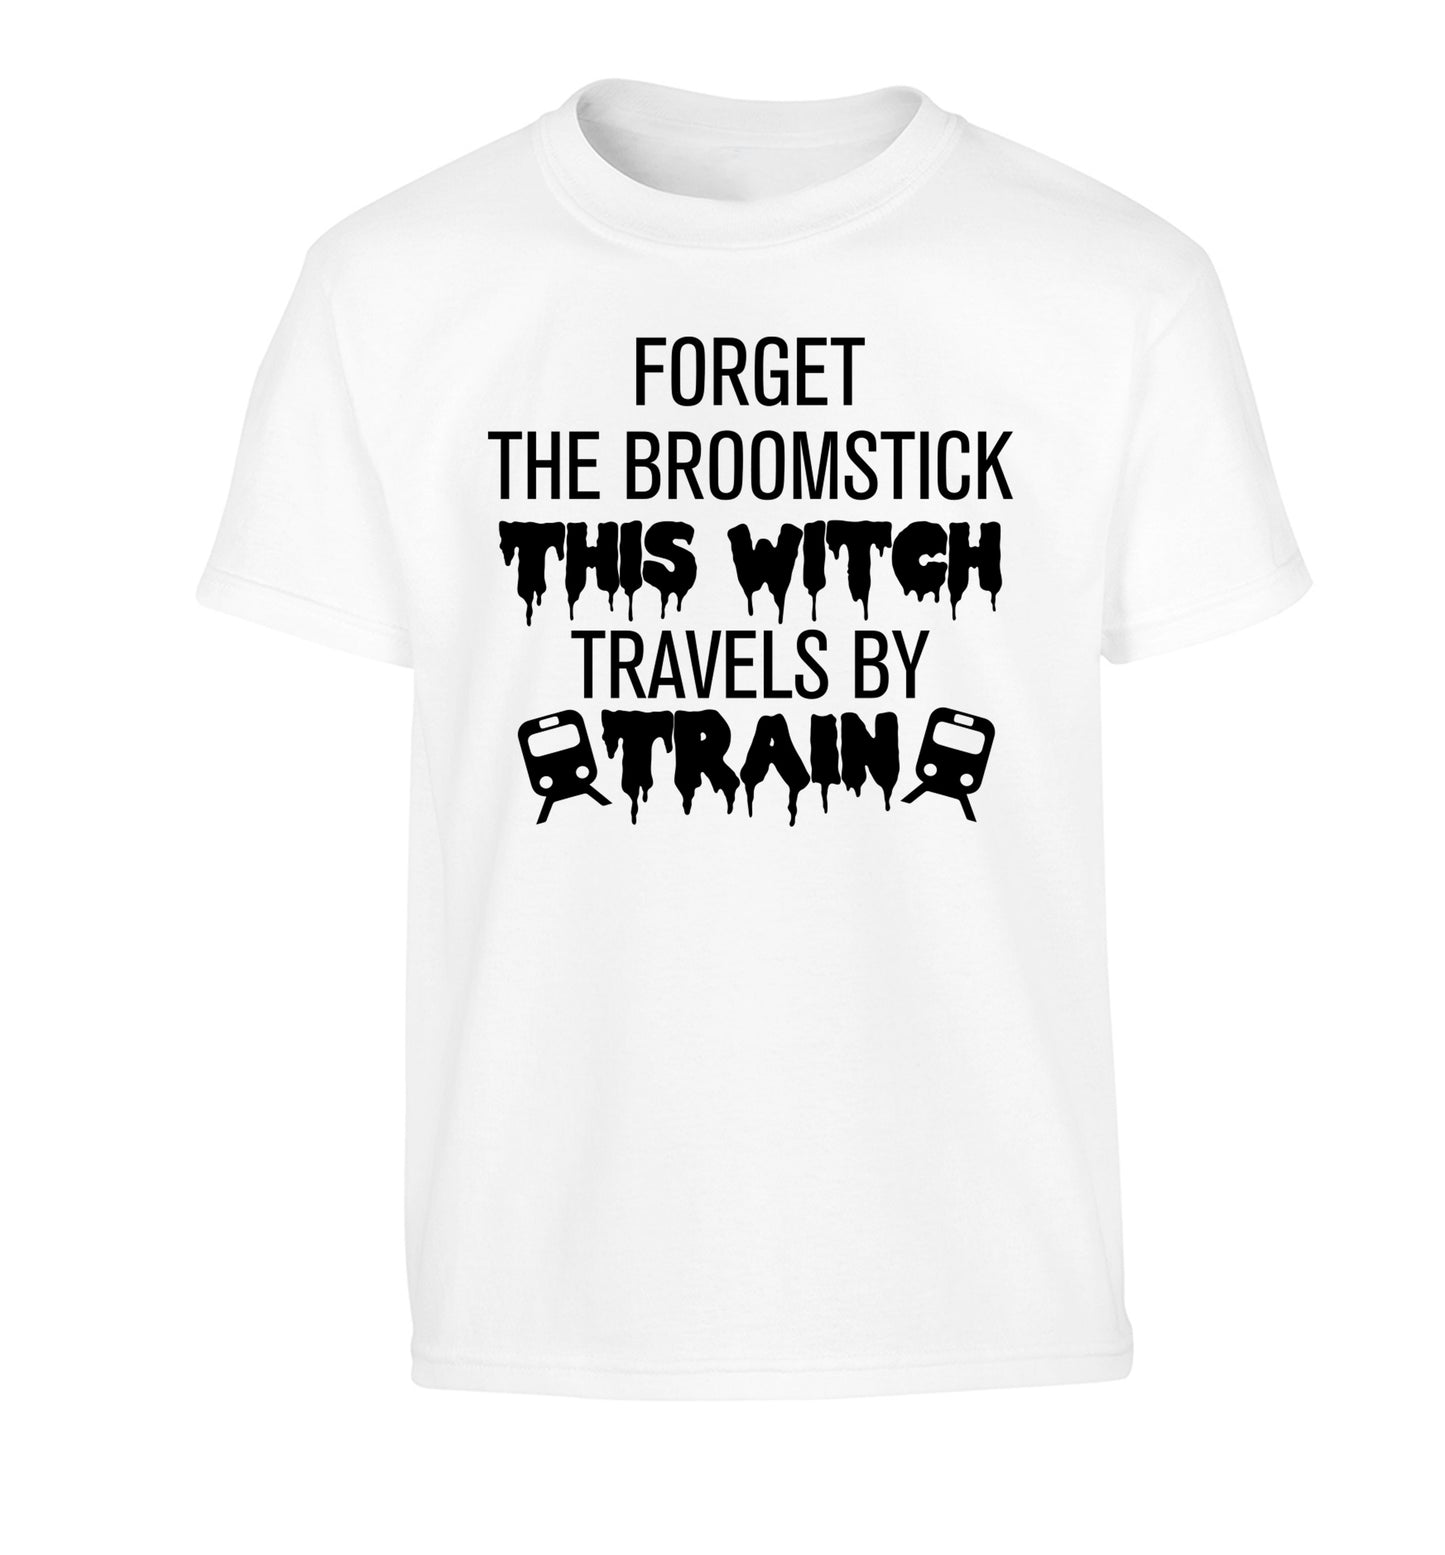 Forget the broomstick this witch travels by train Children's white Tshirt 12-14 Years